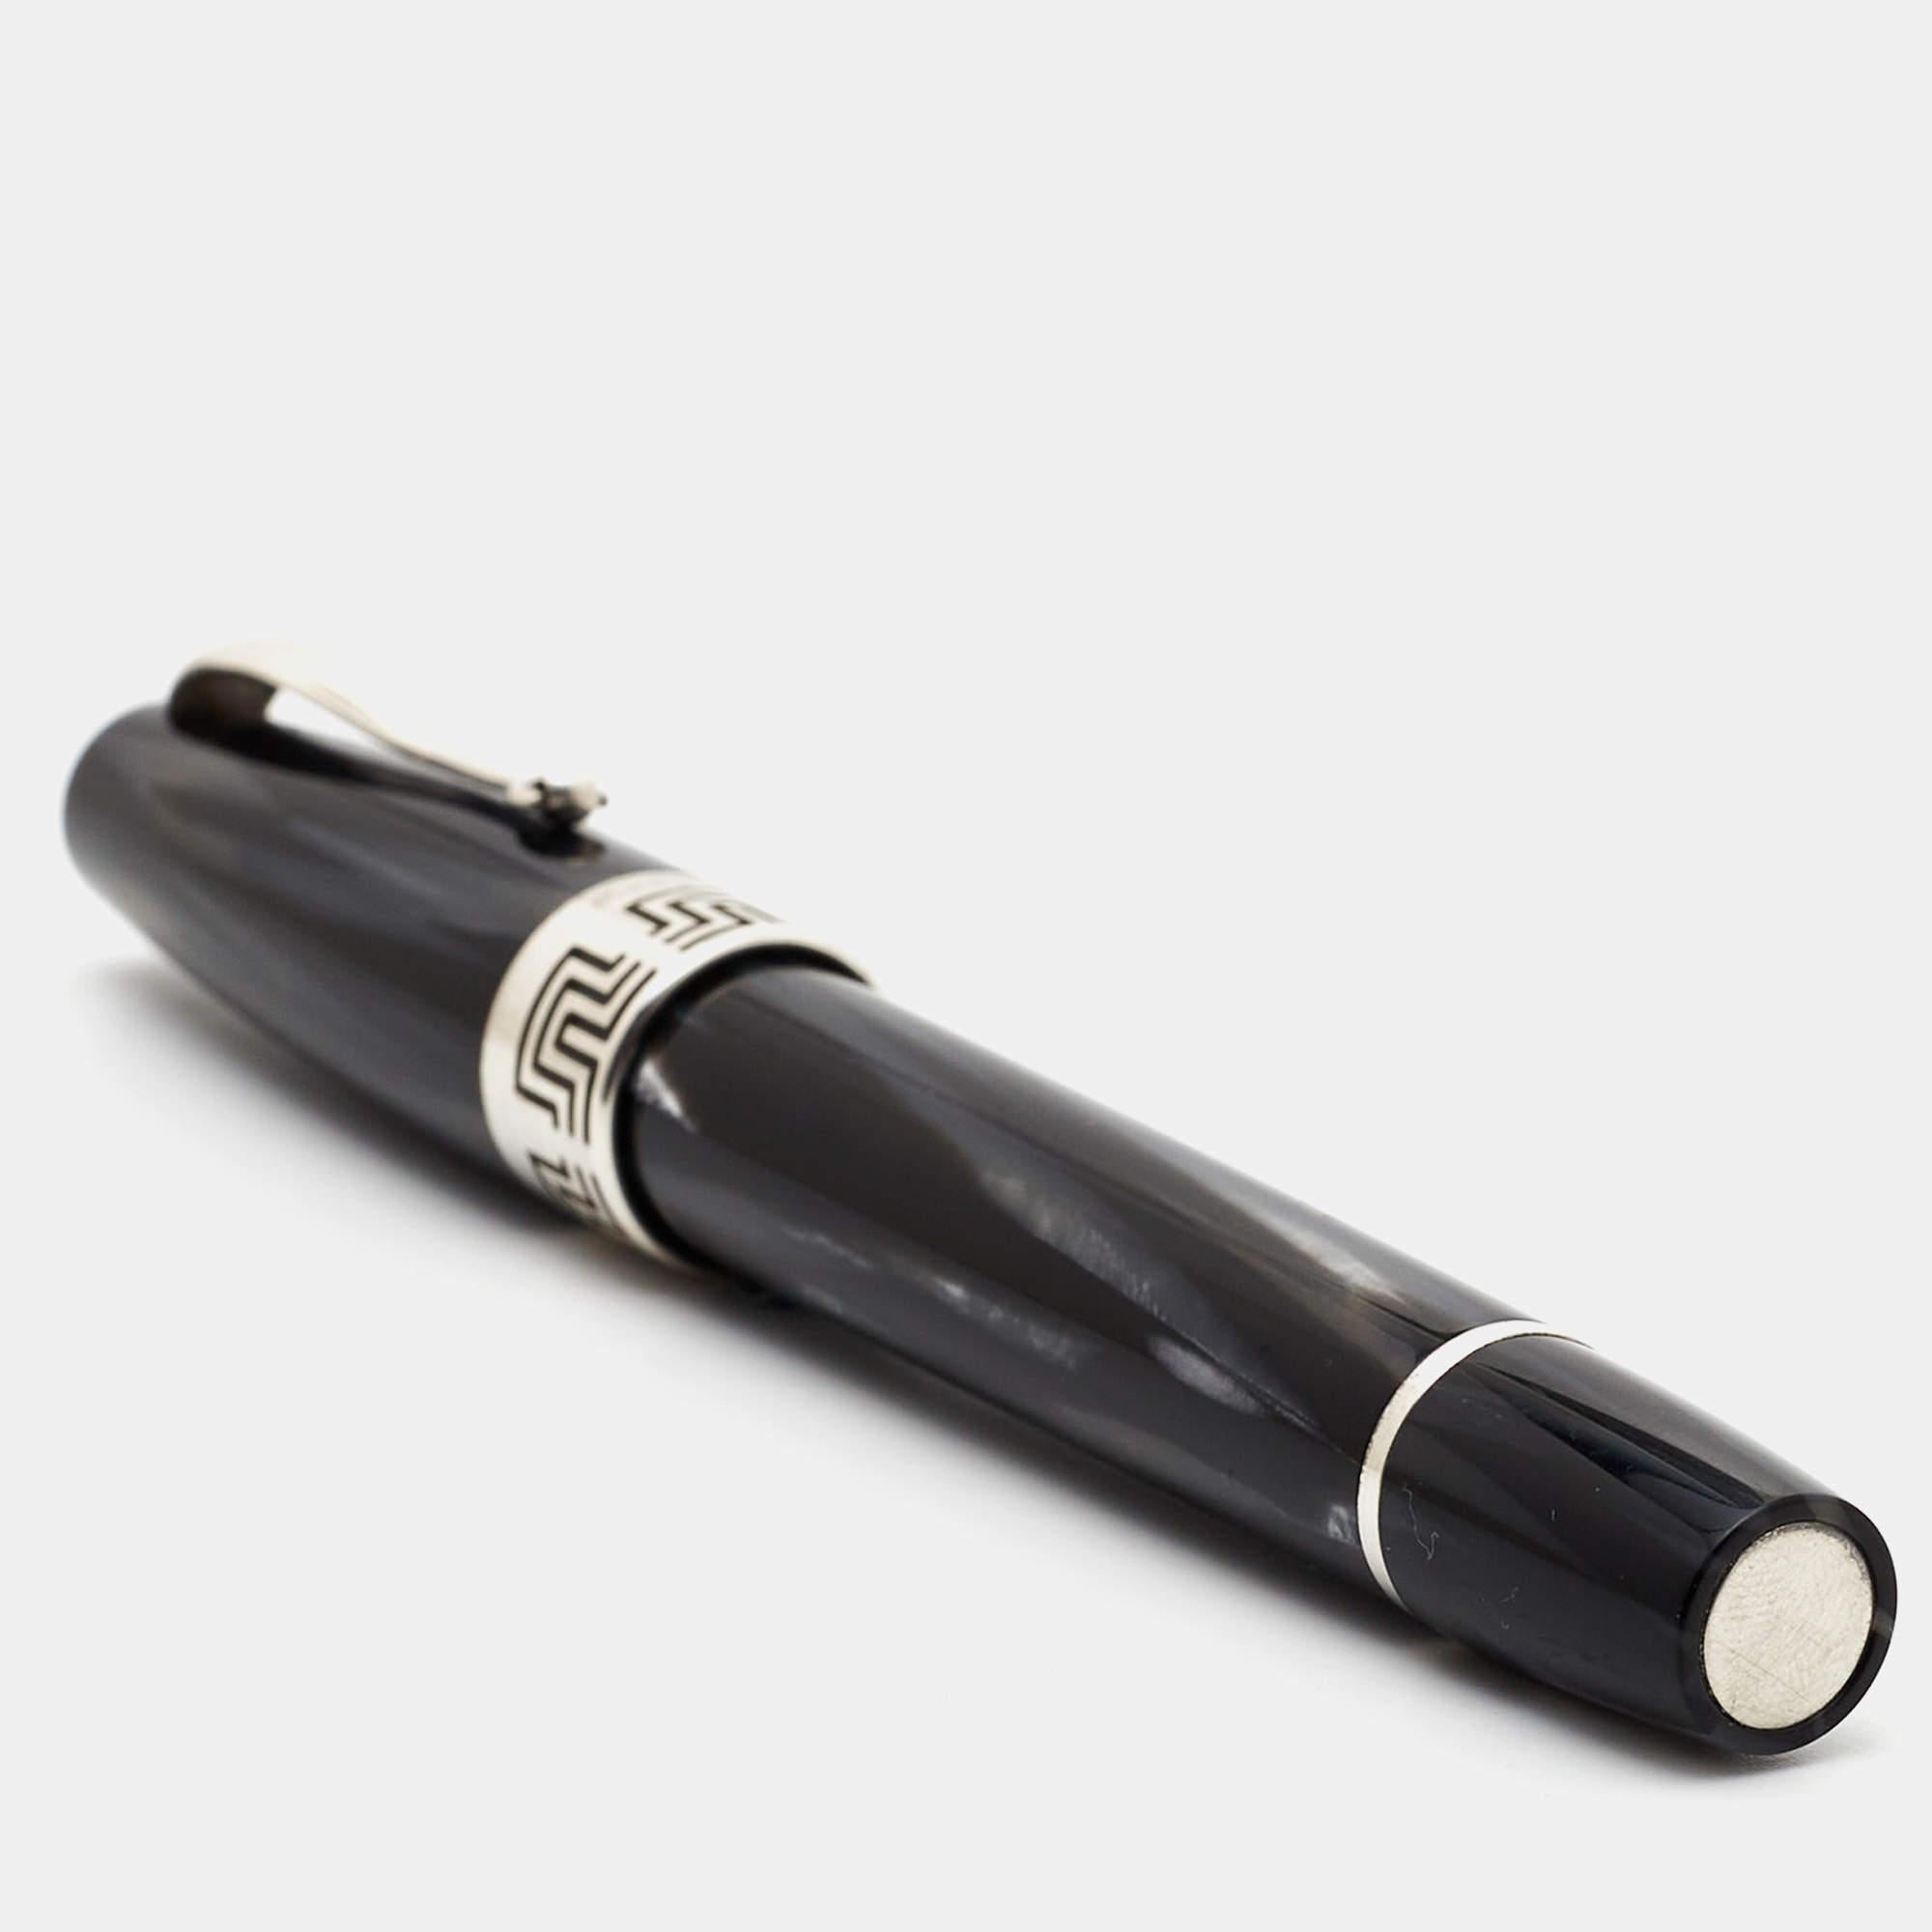 When it comes to high-quality and exclusive accessories, there are not many brands that come close to Montegrappa's level of excellence. This Extra 1930 fountain pen stands as an example of the same. It is made of celluloid and fitted with silver